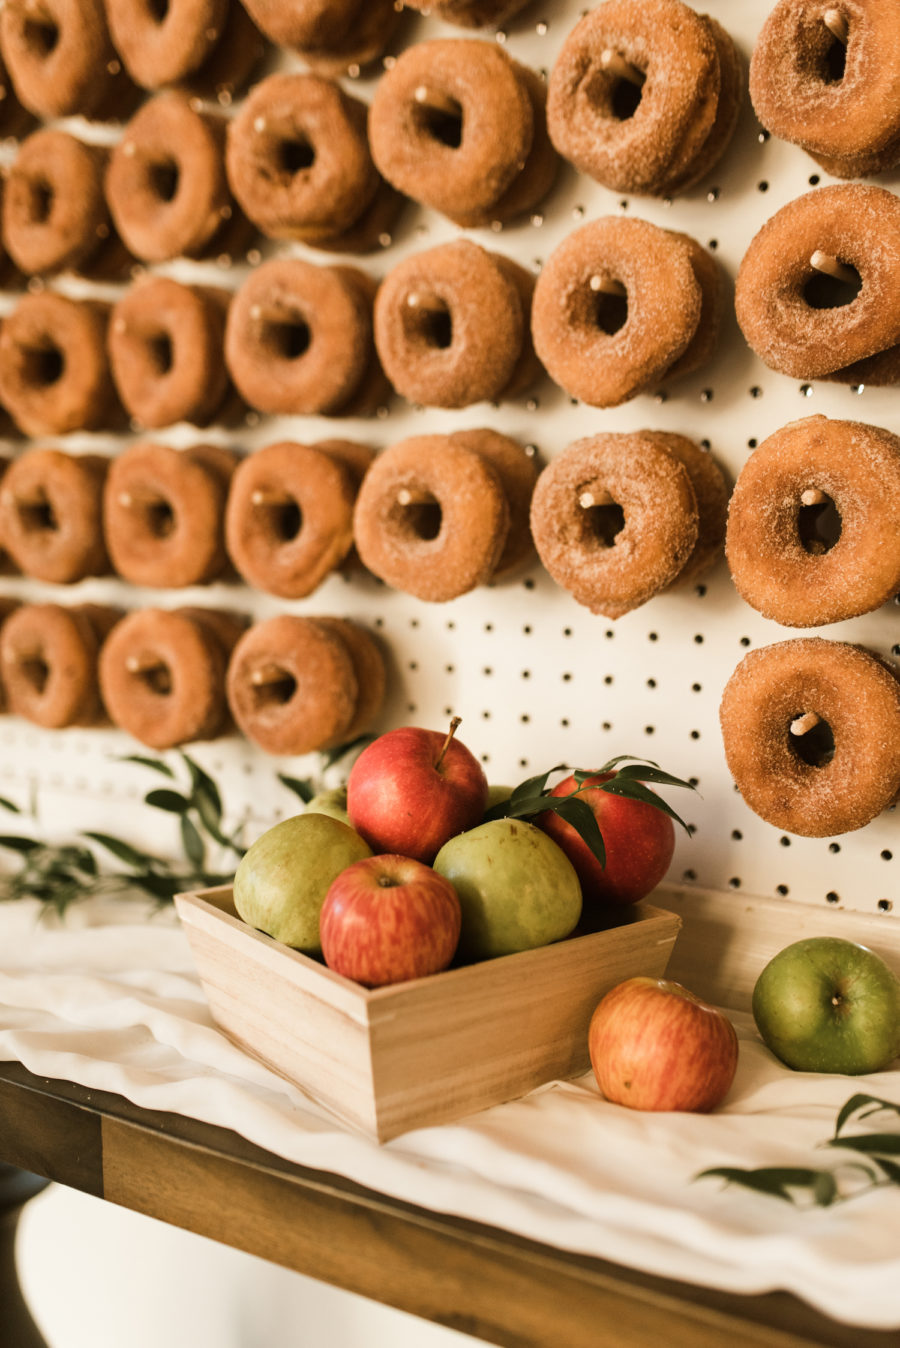 Wedding Donut Wall Dessert Display: Upscale Marble Graystone Quarry Wedding featured on Nashville Bride Guide by Shelby Rae Photographs